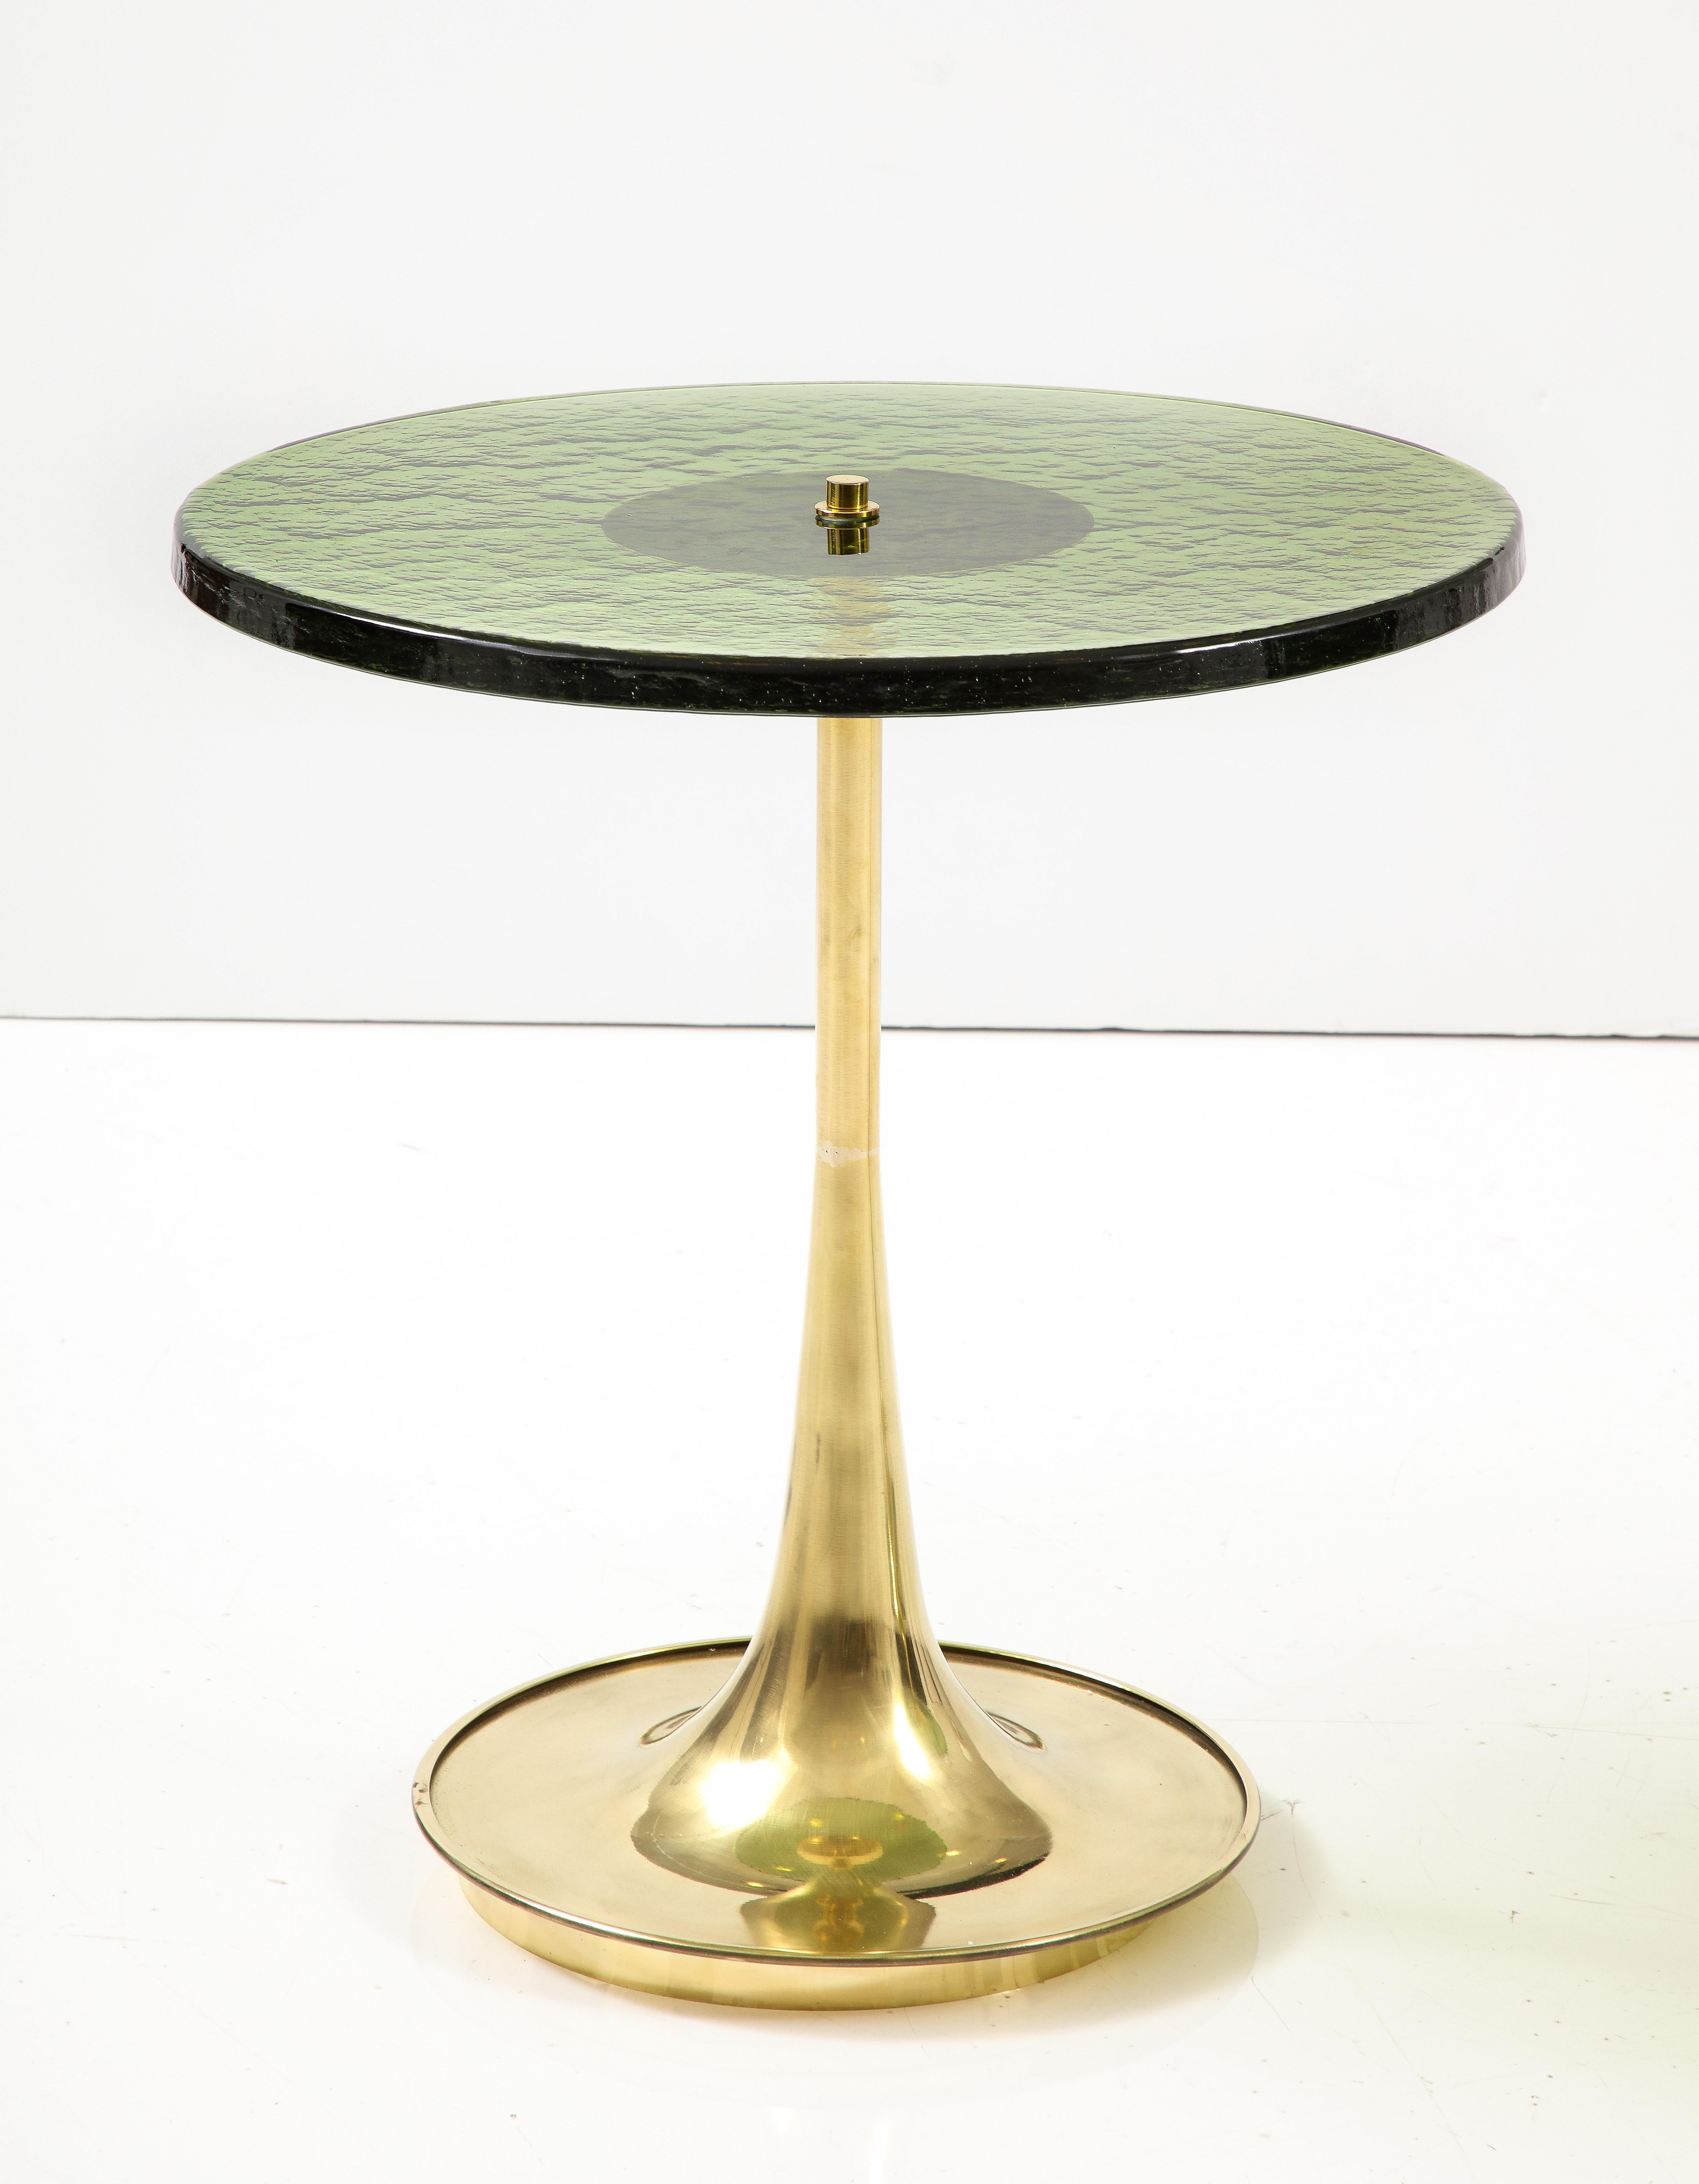 Round green Hue Murano glass and brass martini or side tables, Italy, 2023. Hand-casted 1 inch thick, solid, deep green colored Murano round glass top sits atop a hand-turned, trumpet-shaped brass base. A modern flat top brass finial screws the